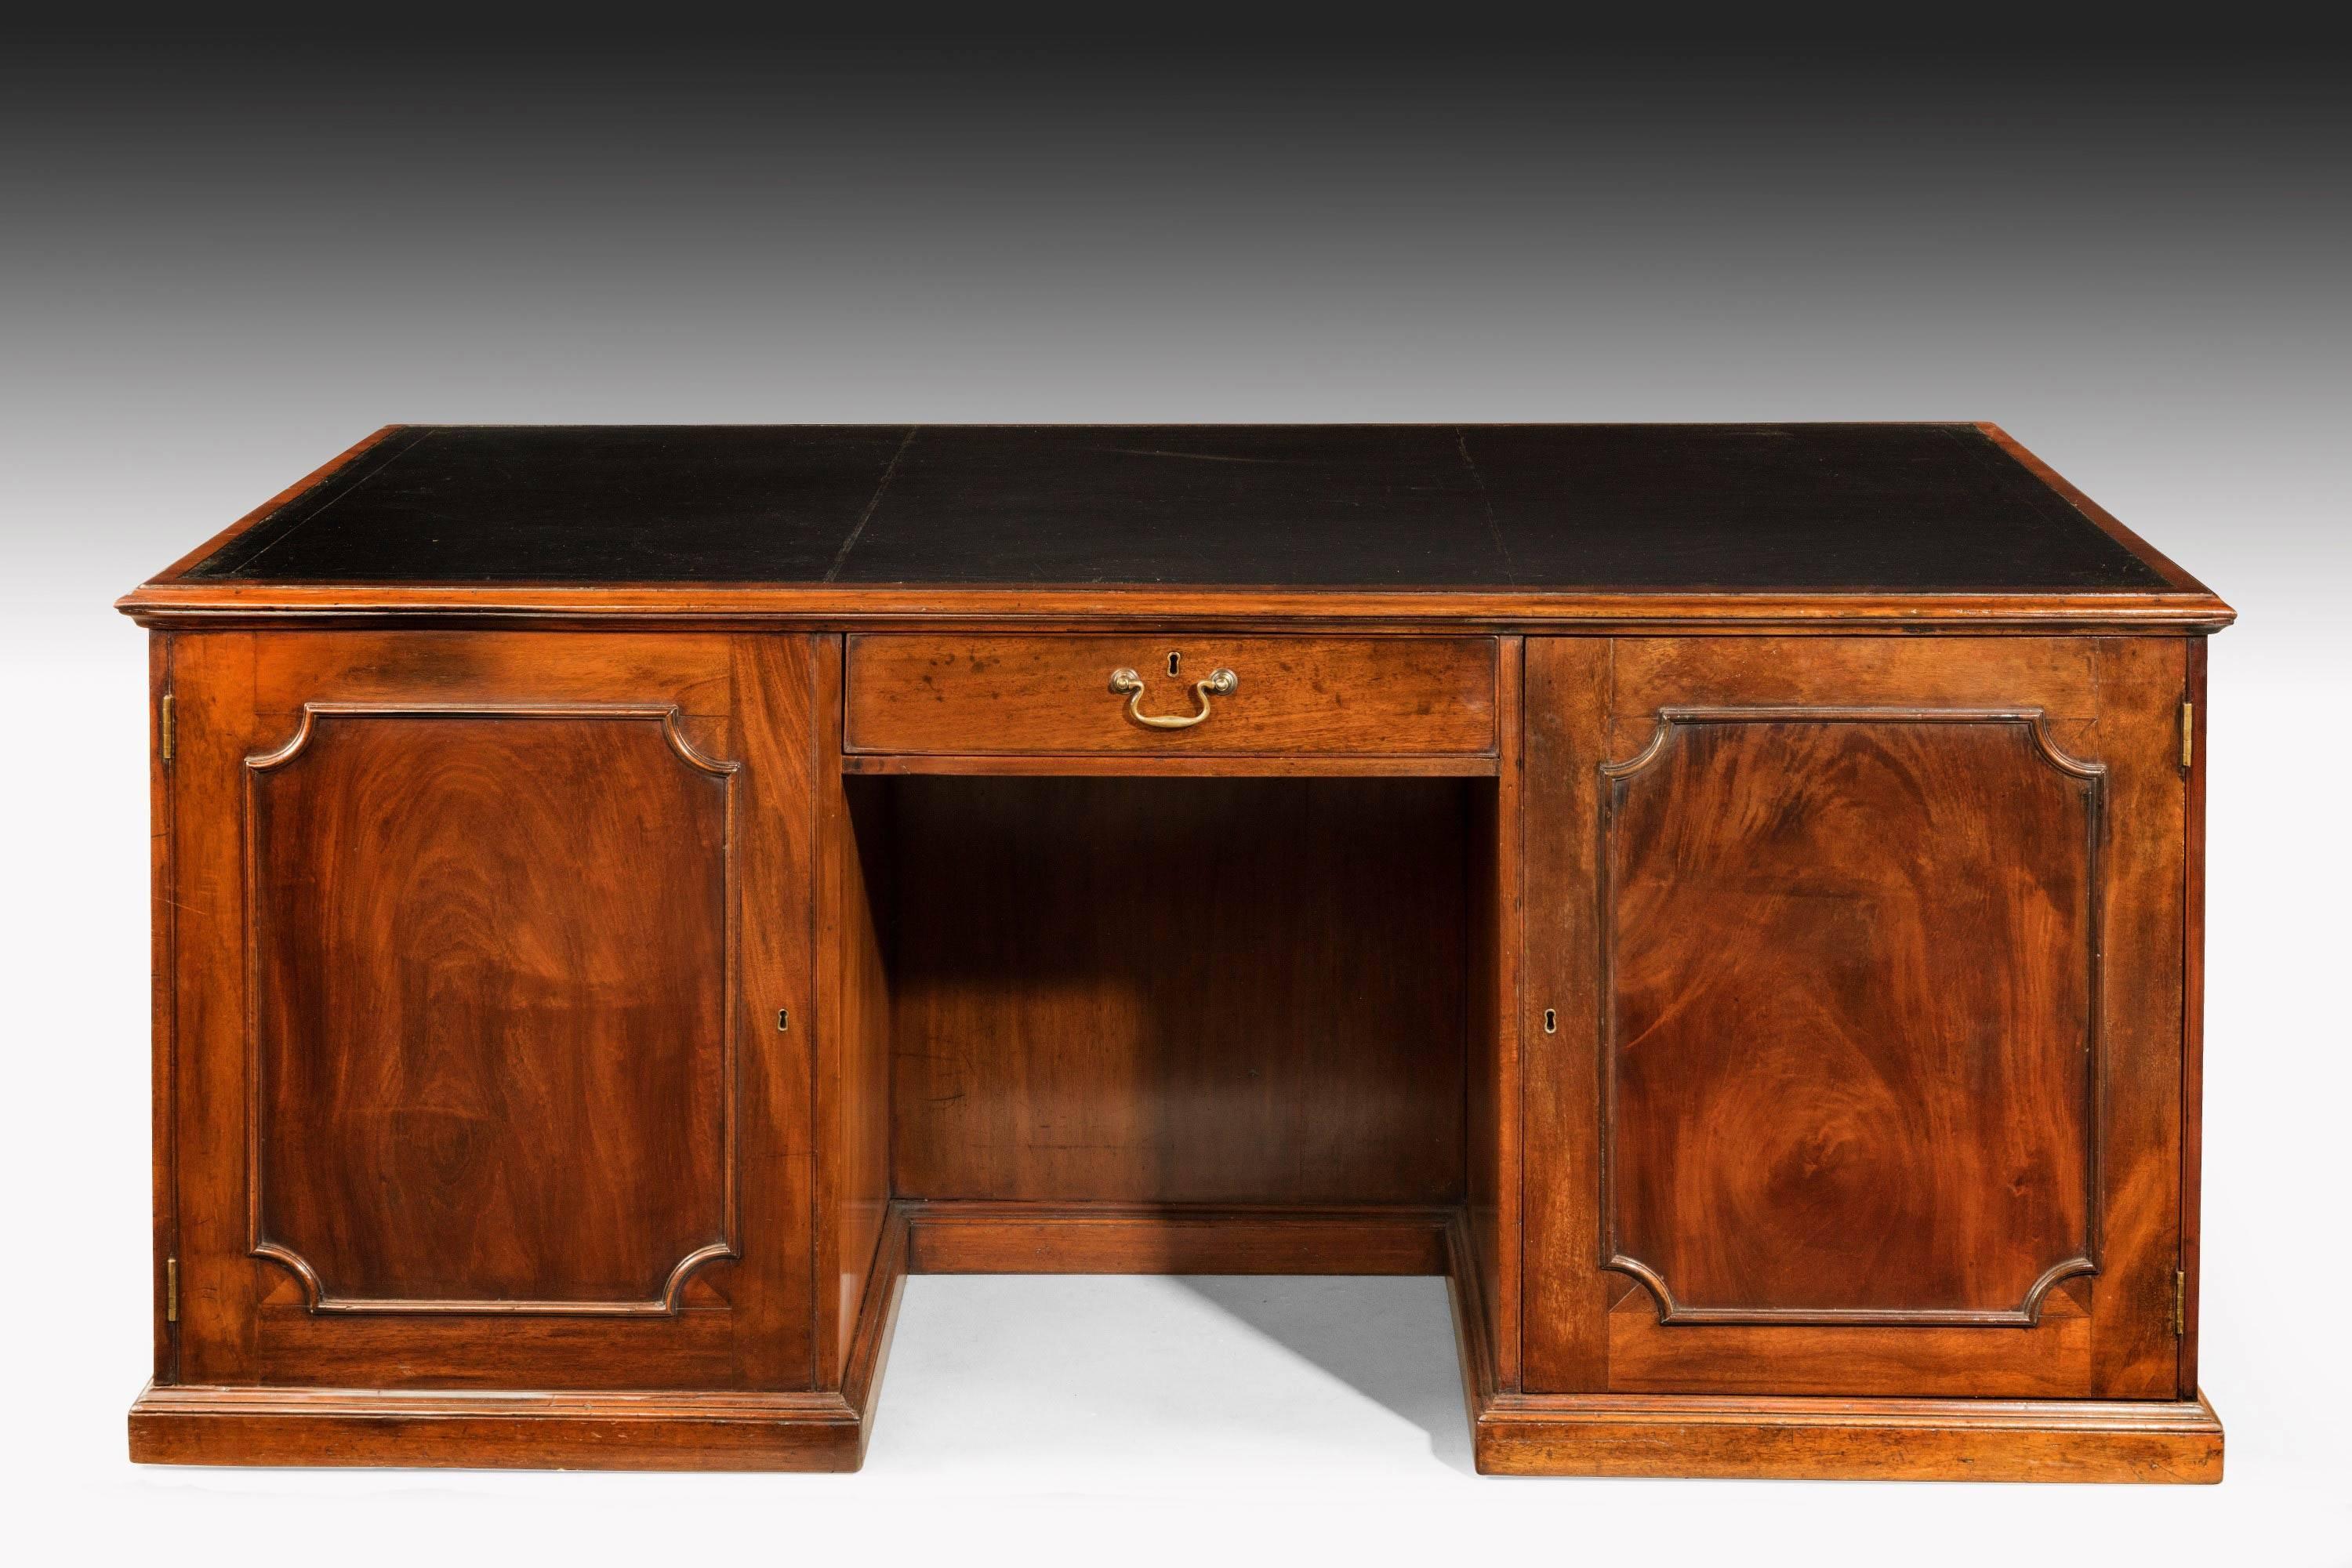 Chippendale Period Mahogany Desk of Unusual Form with Blind Drawers 3